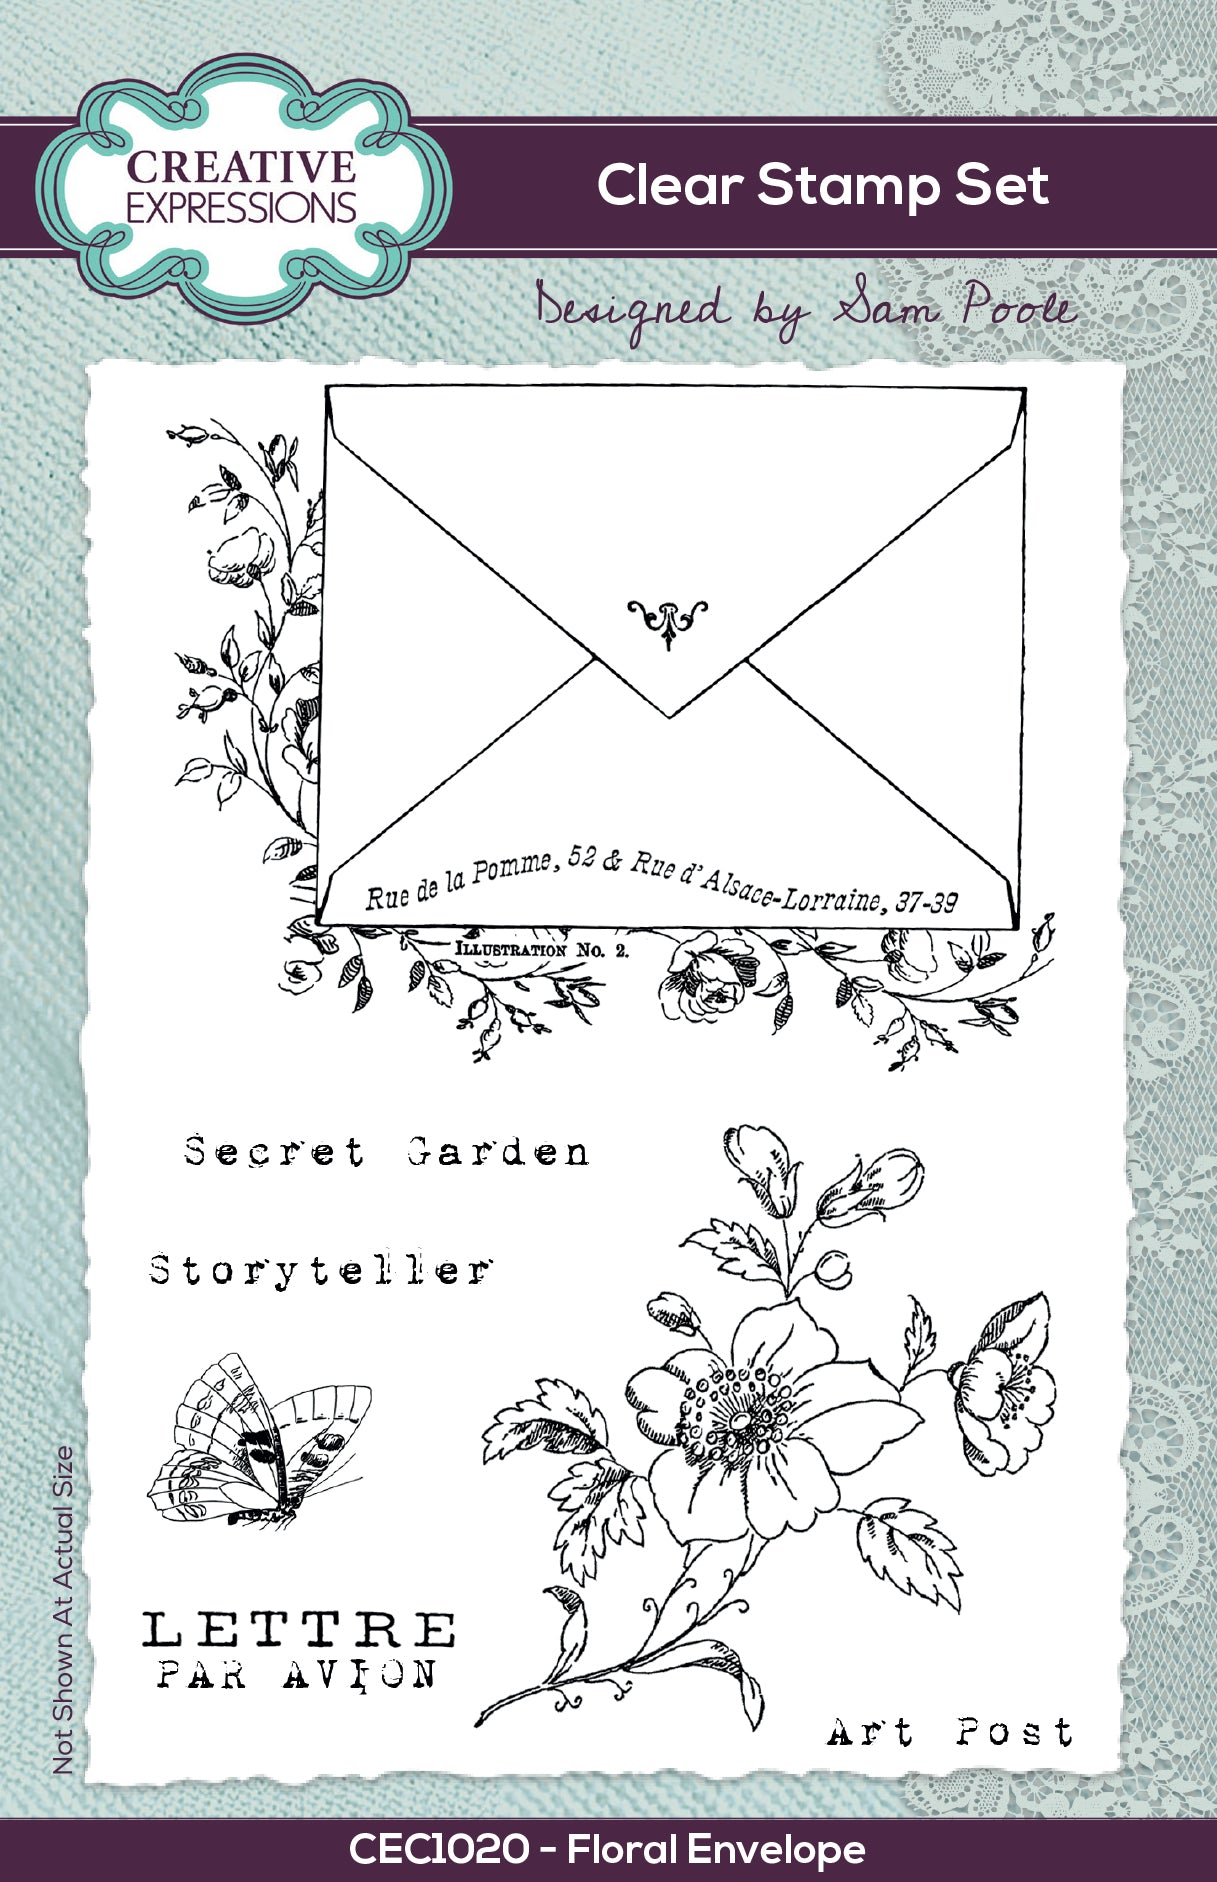 Creative Expressions Sam Poole Floral Envelope 6 in x 4 in Clear Stamp Set